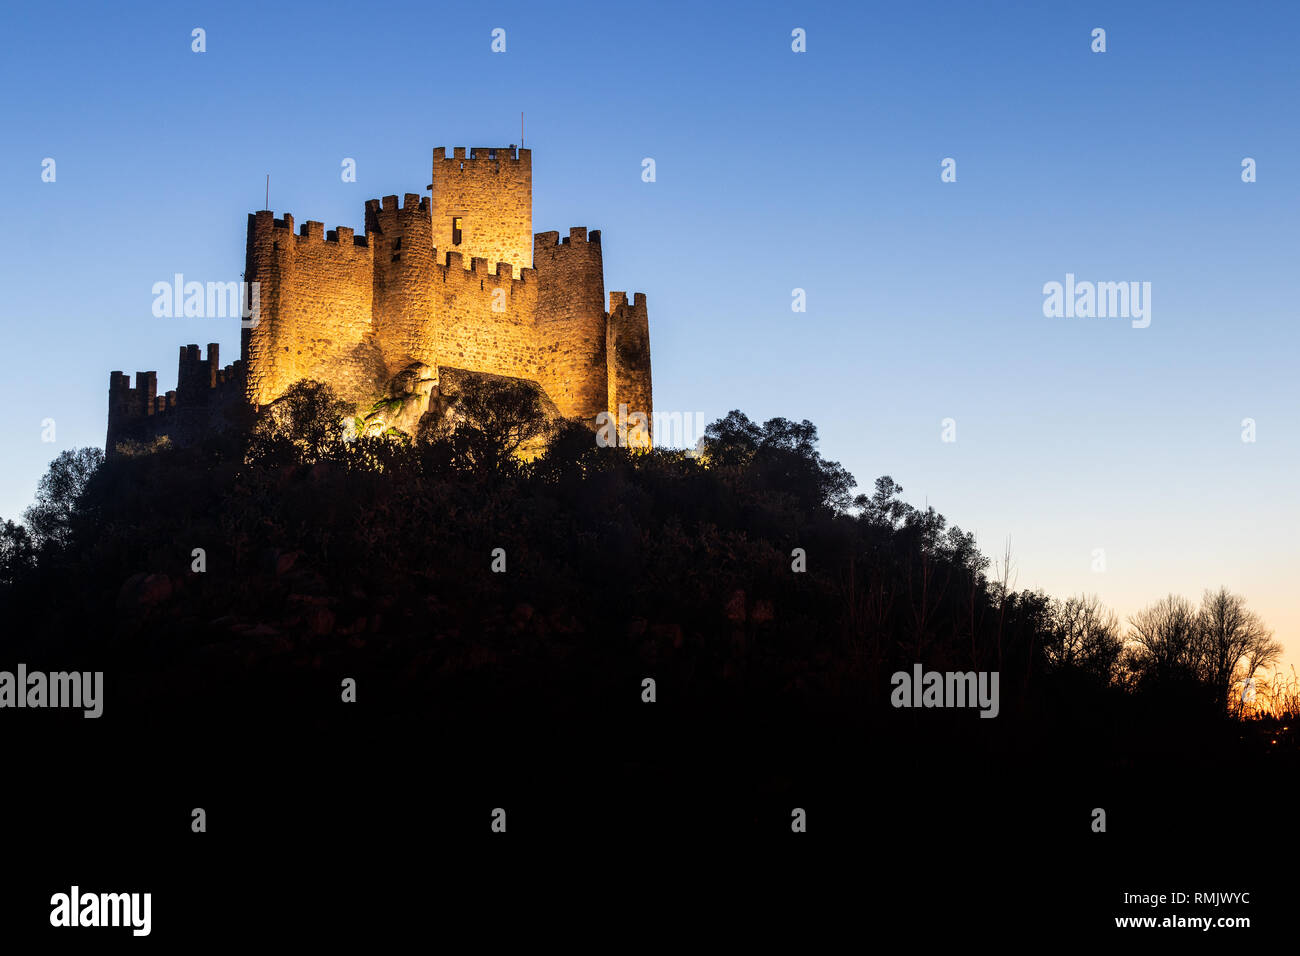 Almourol, Portugal - January 12, 2019: Almourol castle at dusk and illuminated by artificial light. Stock Photo